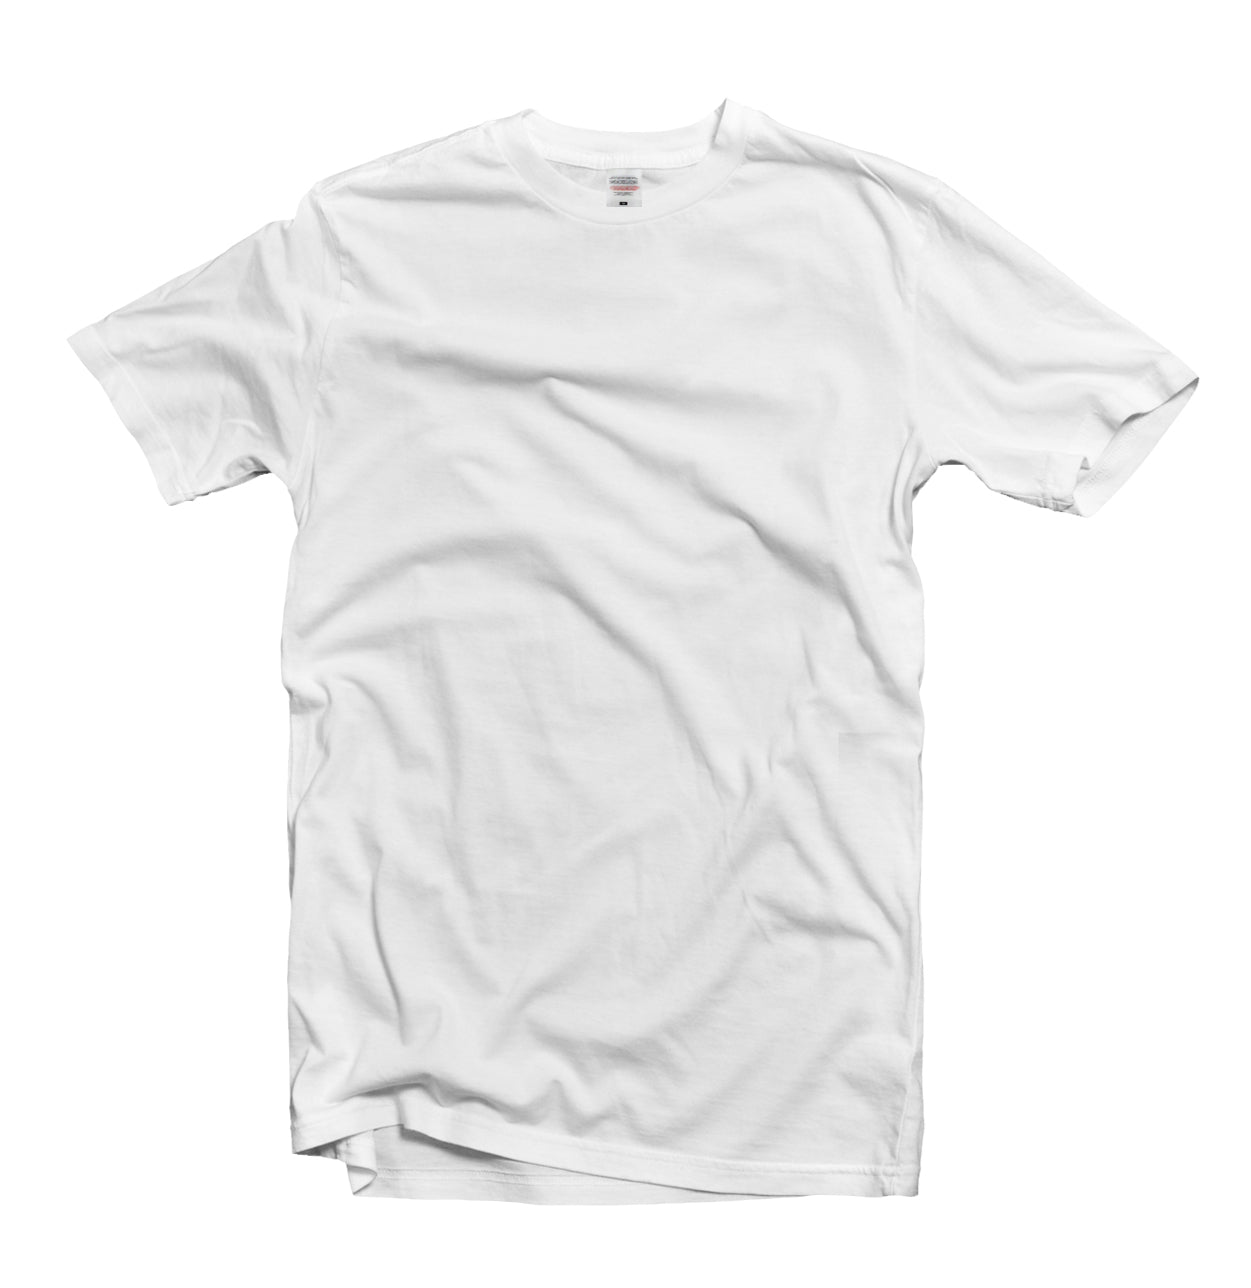 Your Canvas Tee